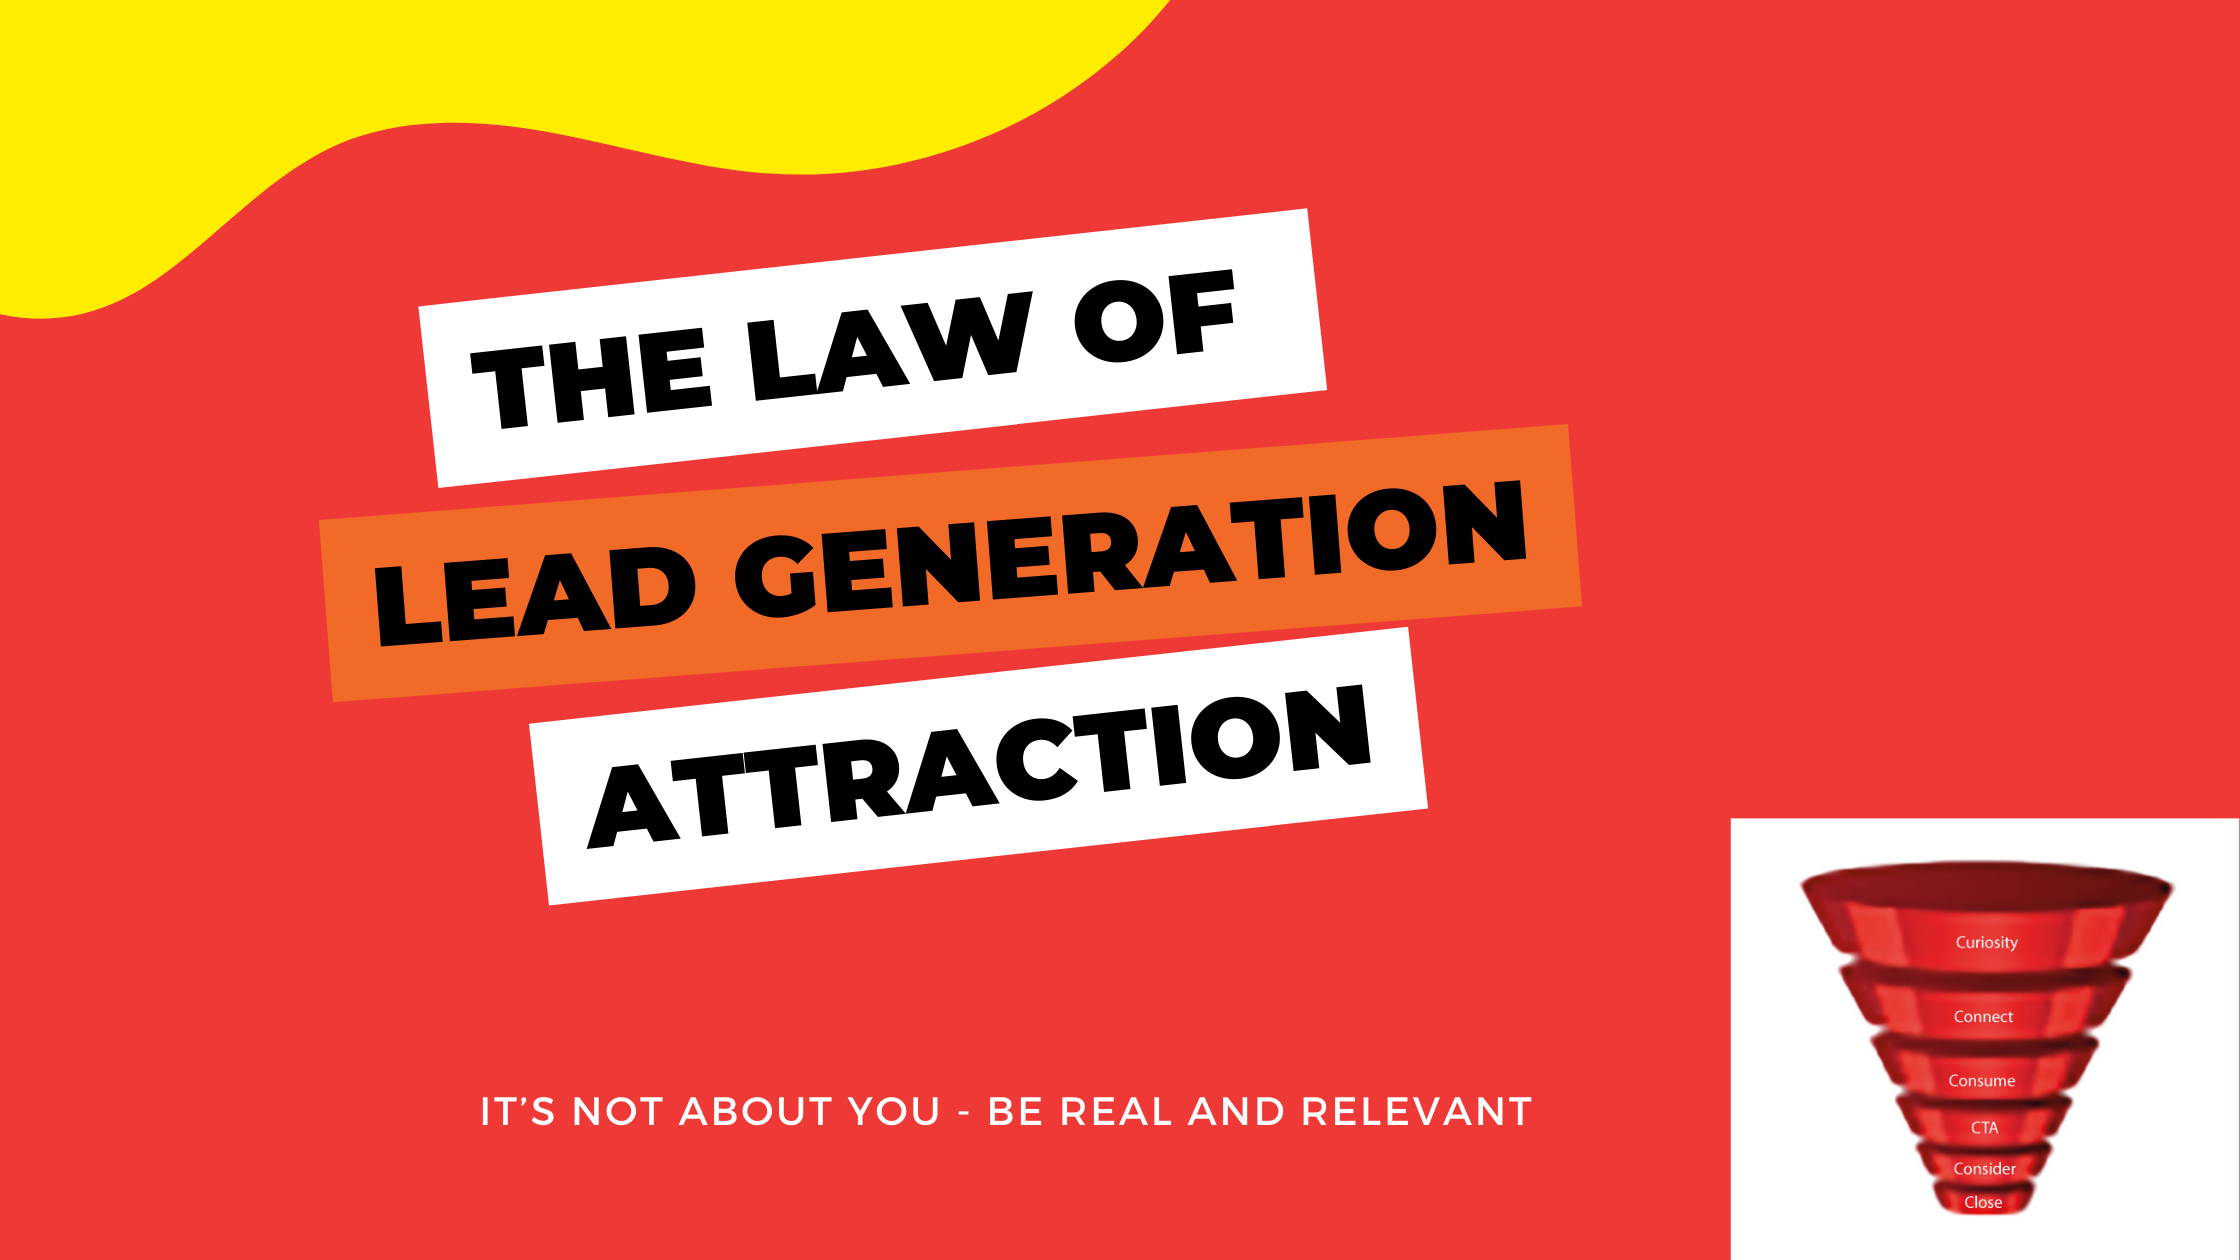 The law of attraction in lead generation